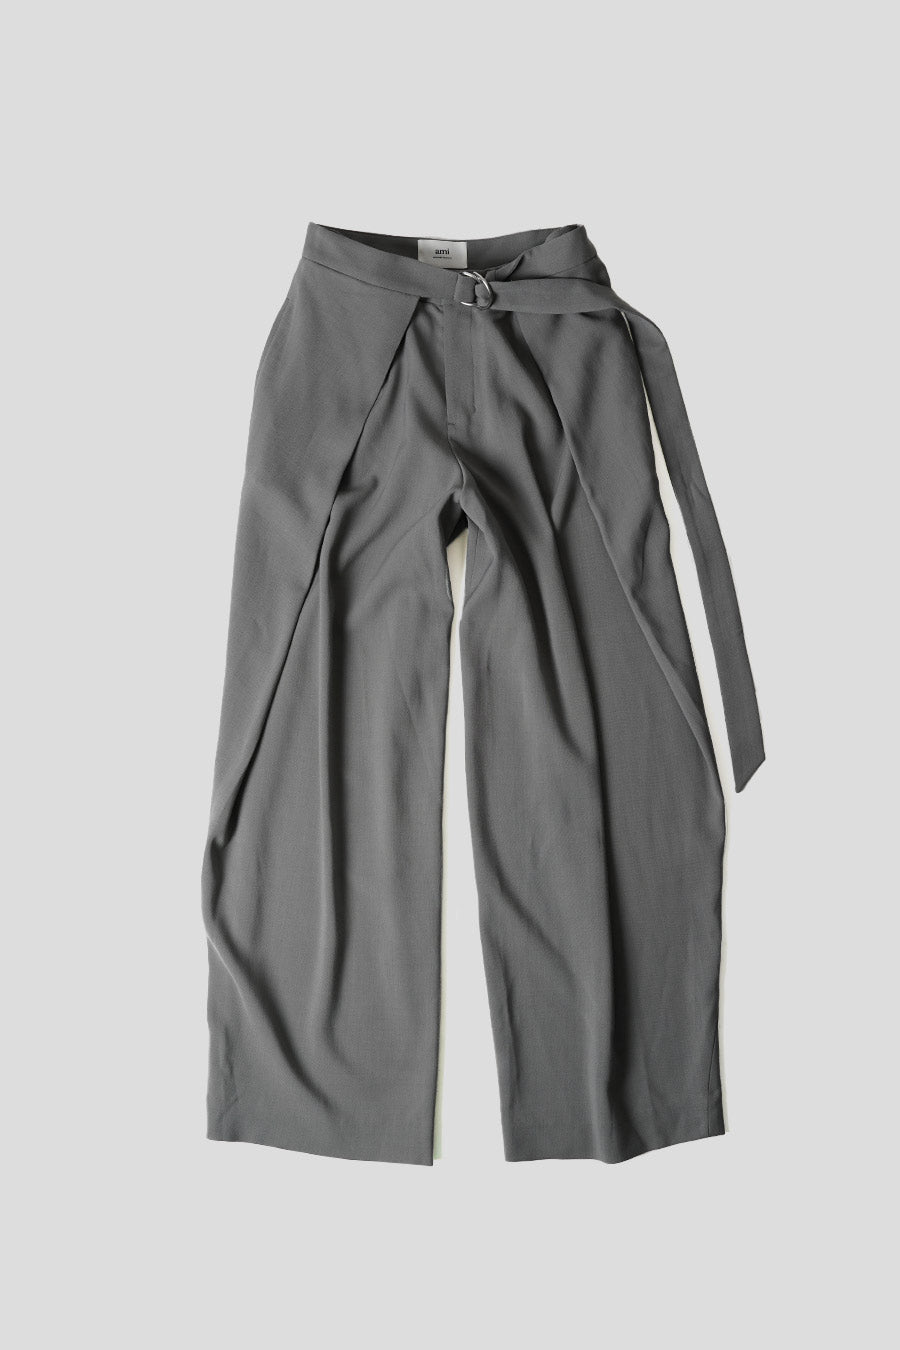 AMI PARIS - TROUSERS WITH PANELS MINERAL GREY - LE LABO STORE